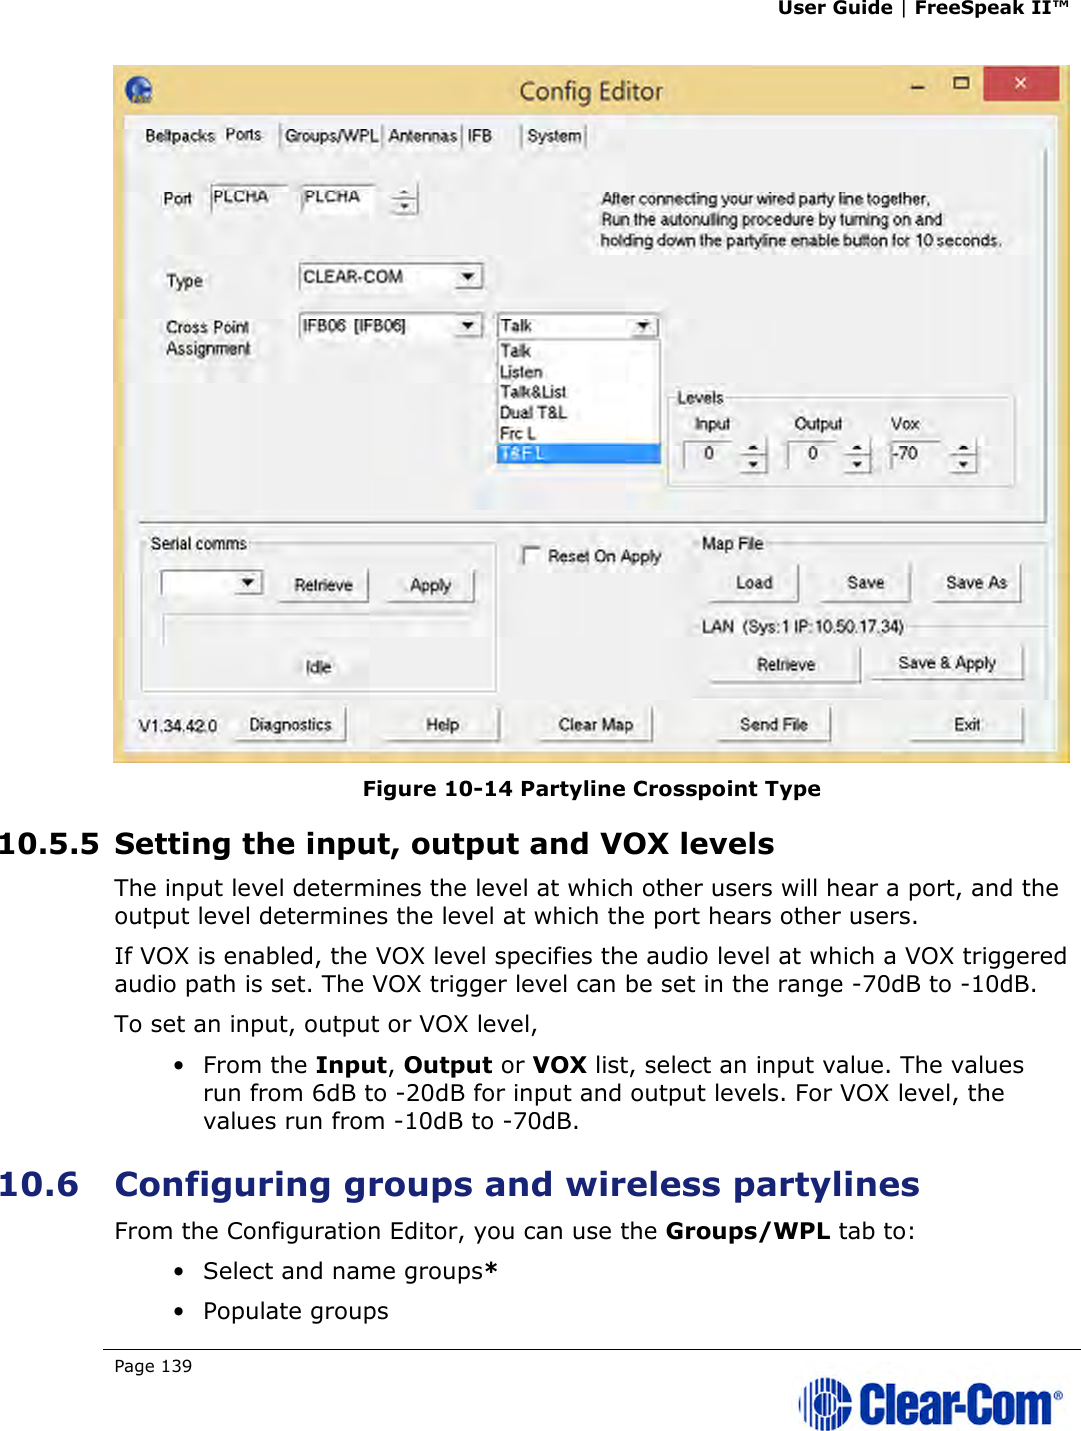 User Guide | FreeSpeak II™  Page 139    Figure 10-14 Partyline Crosspoint Type 10.5.5 Setting the input, output and VOX levels The input level determines the level at which other users will hear a port, and the output level determines the level at which the port hears other users. If VOX is enabled, the VOX level specifies the audio level at which a VOX triggered audio path is set. The VOX trigger level can be set in the range -70dB to -10dB. To set an input, output or VOX level, • From the Input, Output or VOX list, select an input value. The values run from 6dB to -20dB for input and output levels. For VOX level, the values run from -10dB to -70dB. 10.6 Configuring groups and wireless partylines From the Configuration Editor, you can use the Groups/WPL tab to: • Select and name groups* • Populate groups 